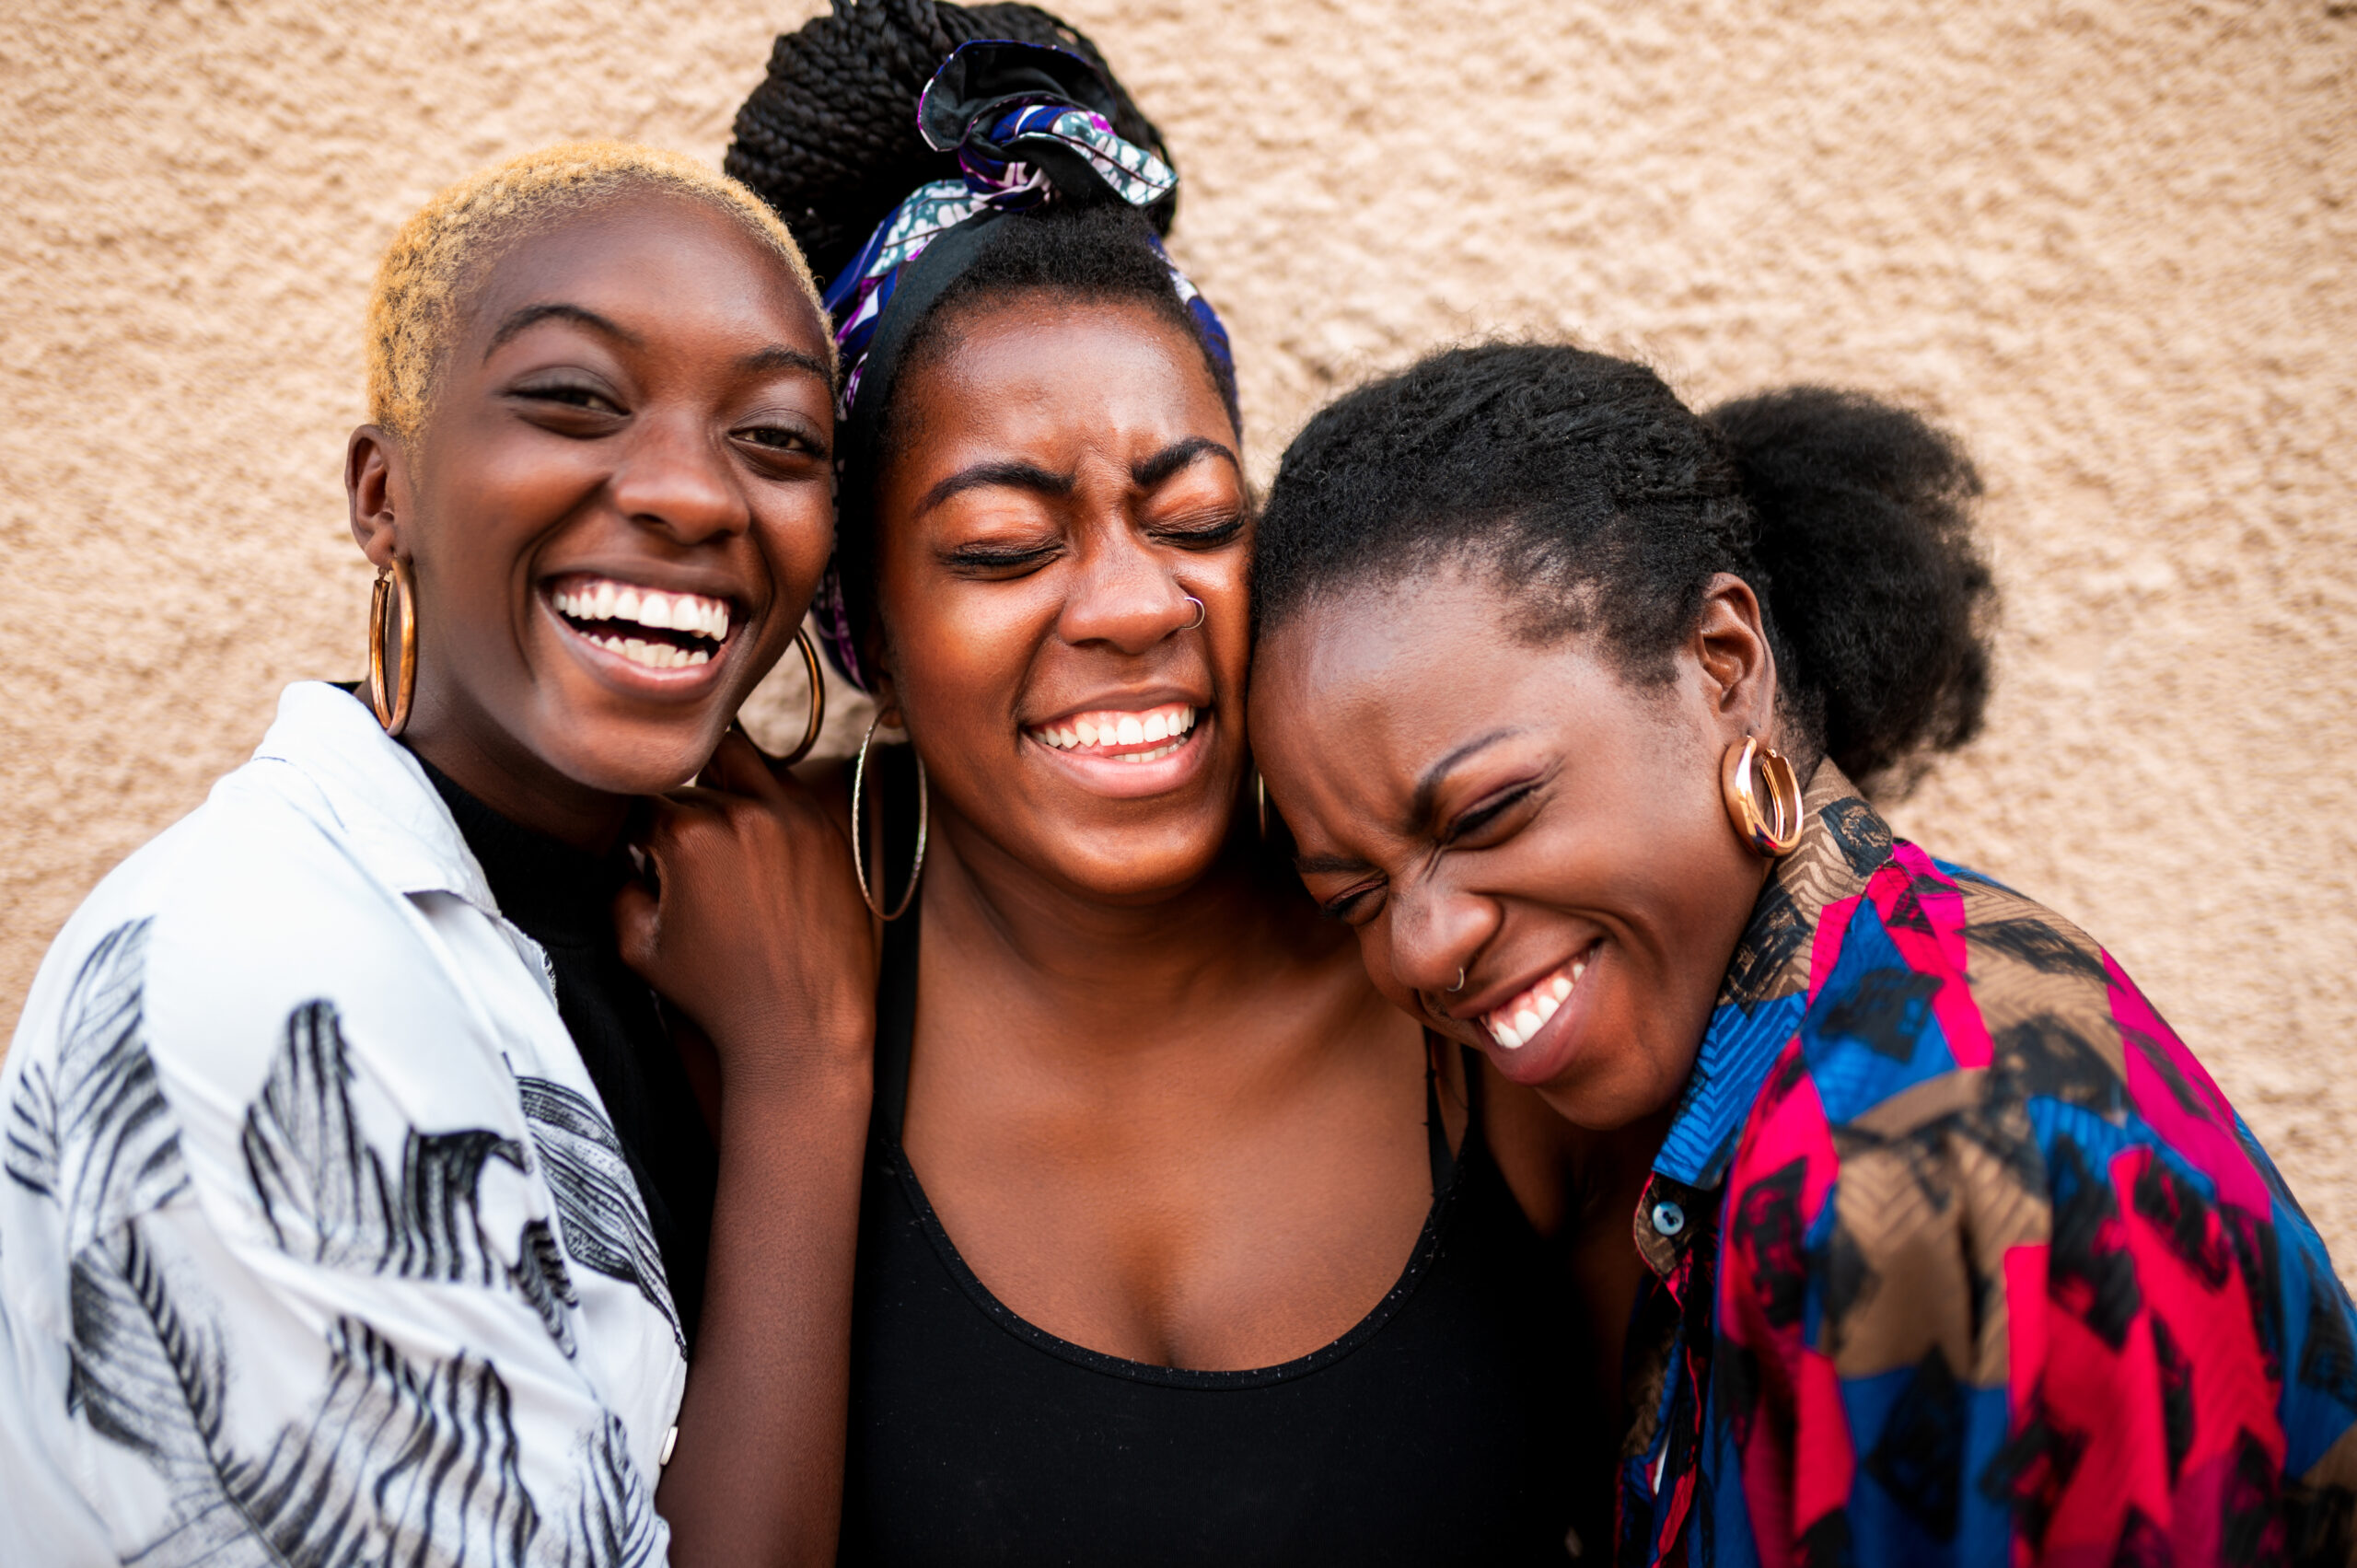 Three Black women smiling for the camera while embracing one another.